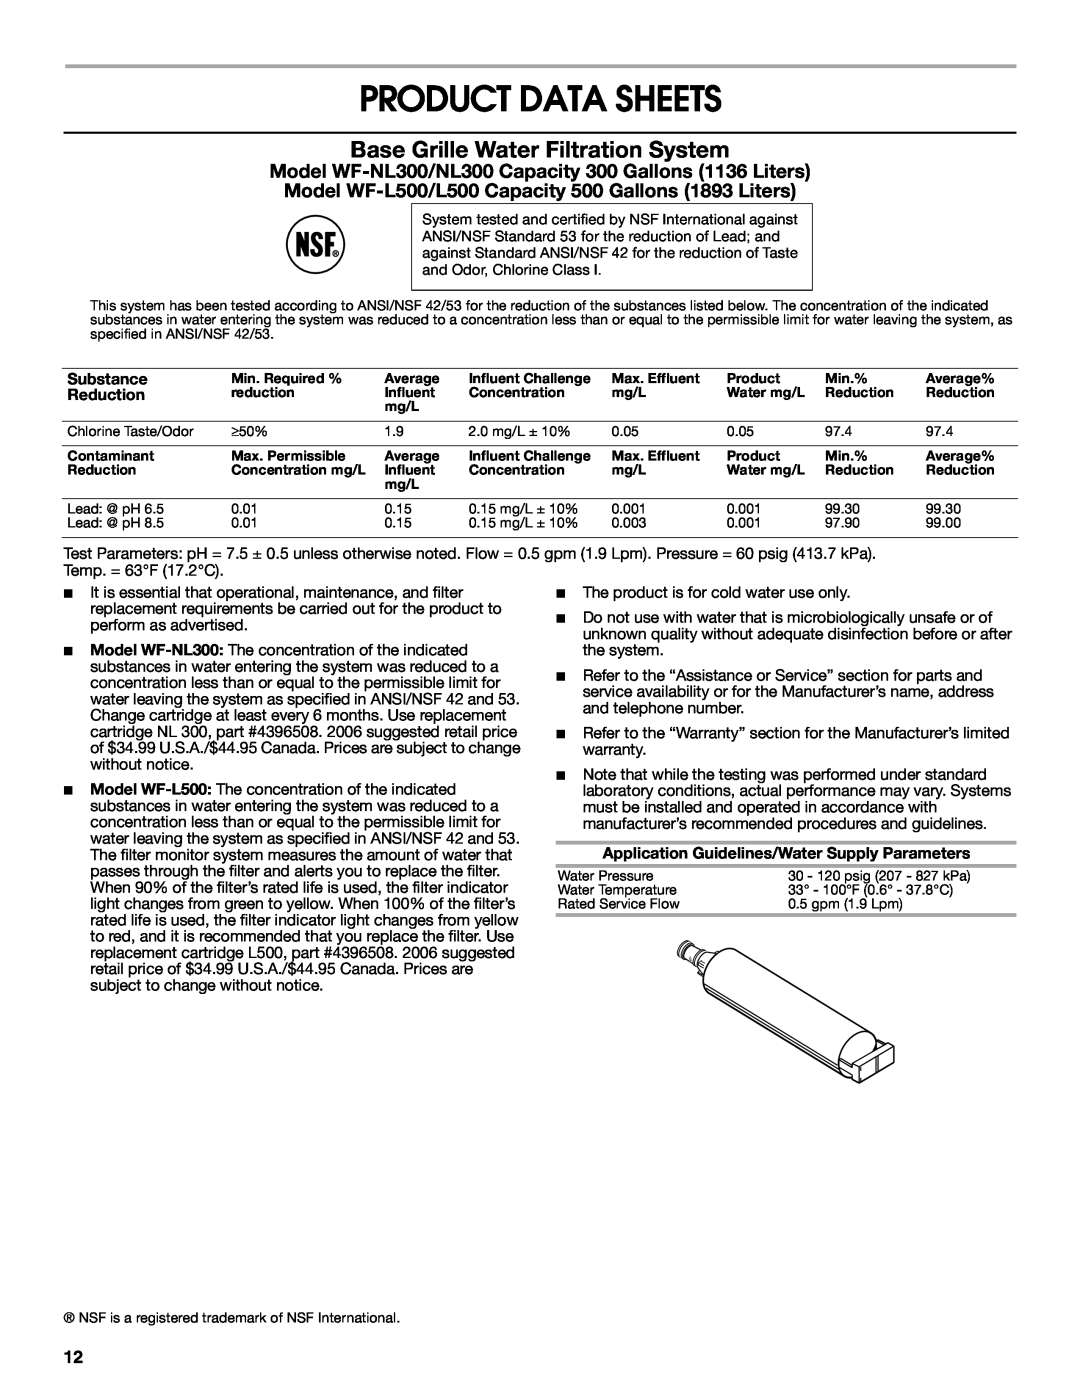 Estate 2318600 warranty Product Data Sheets, Base Grille Water Filtration System 